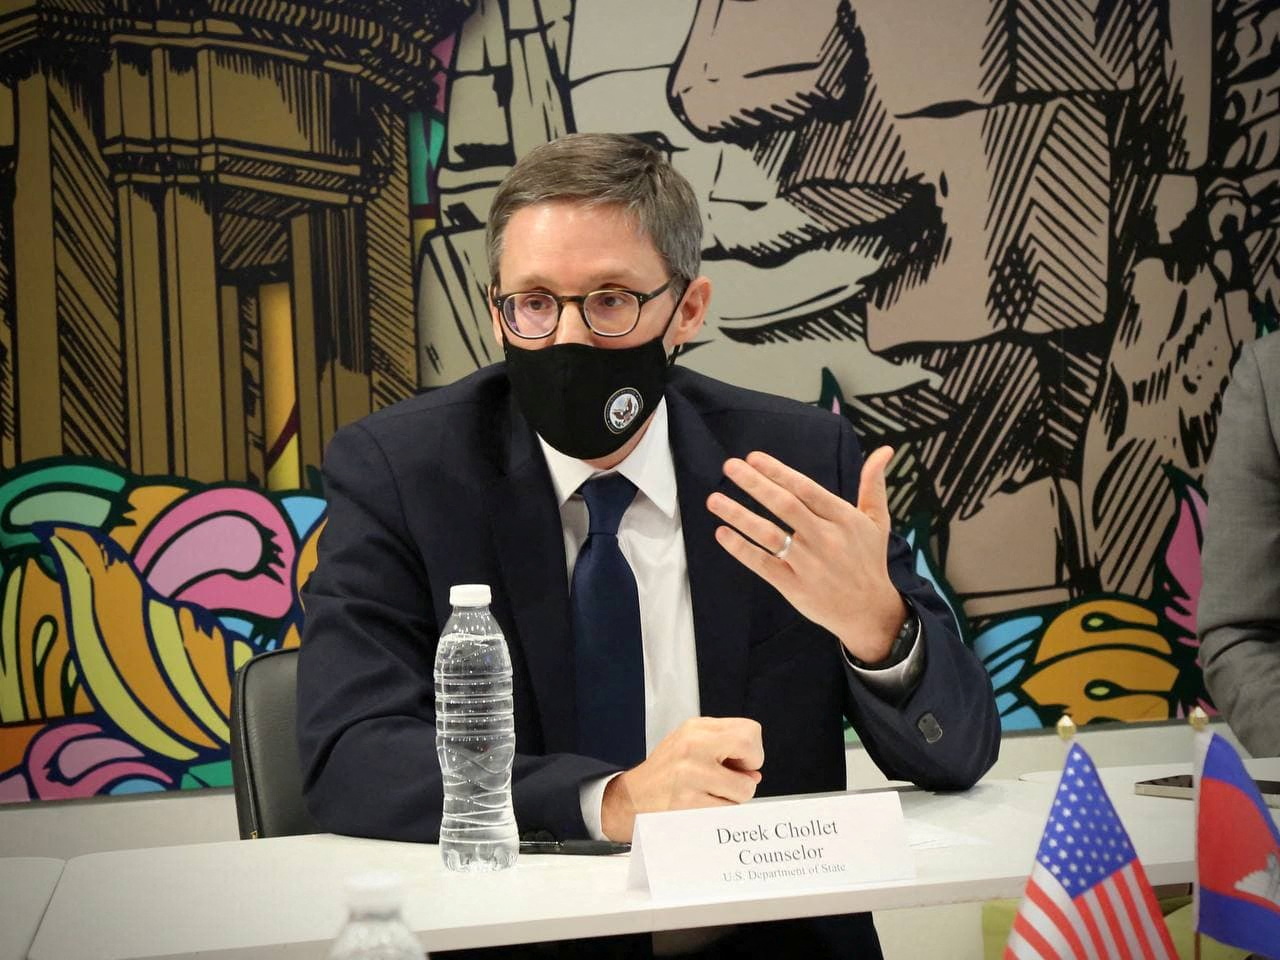 U.S. State Department Counselor Derek Chollet speaks during a briefing with media in Phnom Penh